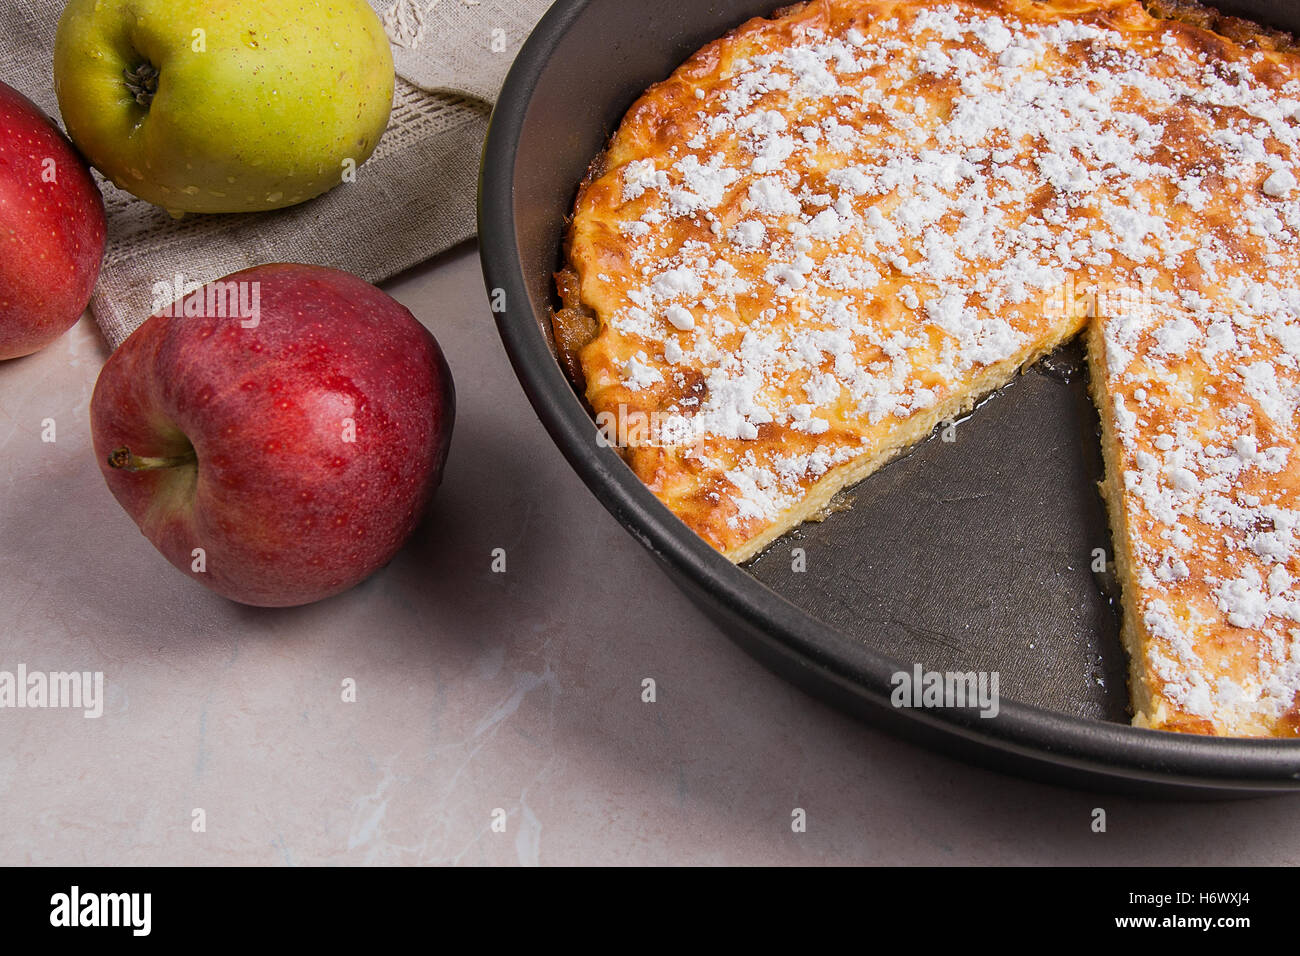 Homemade freshly baked apple pie with apples. Dessert ready to eat. Several organic red and green apples in the background. Stock Photo